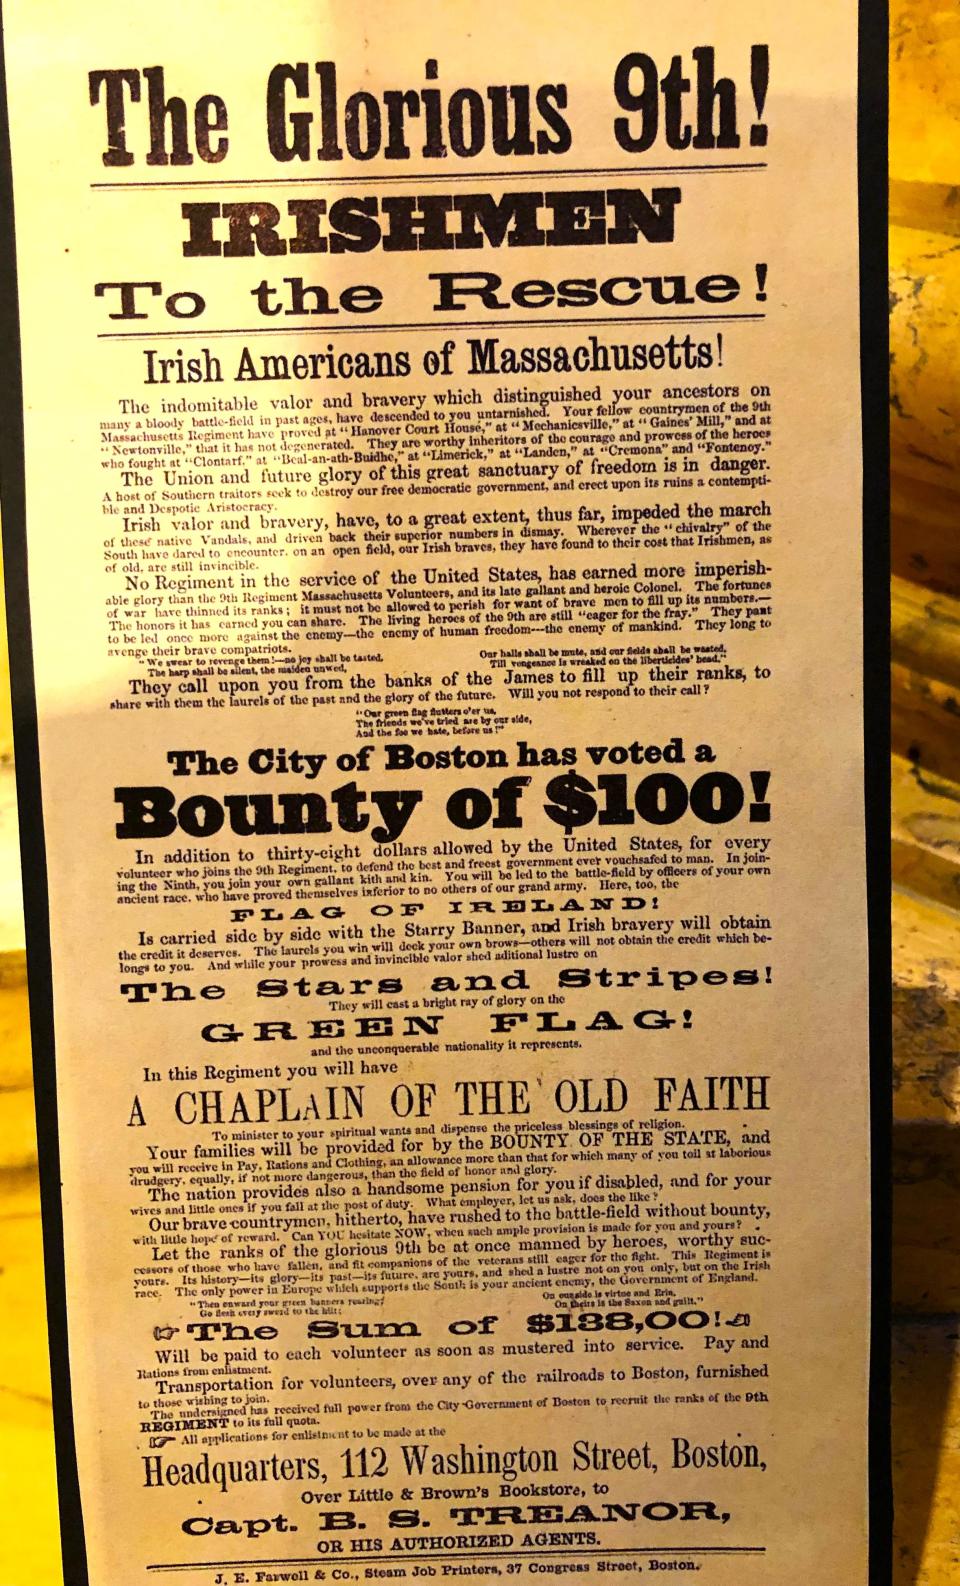 Lots of incentives were offered to Irish immigrants if they enlisted in the Union Army.